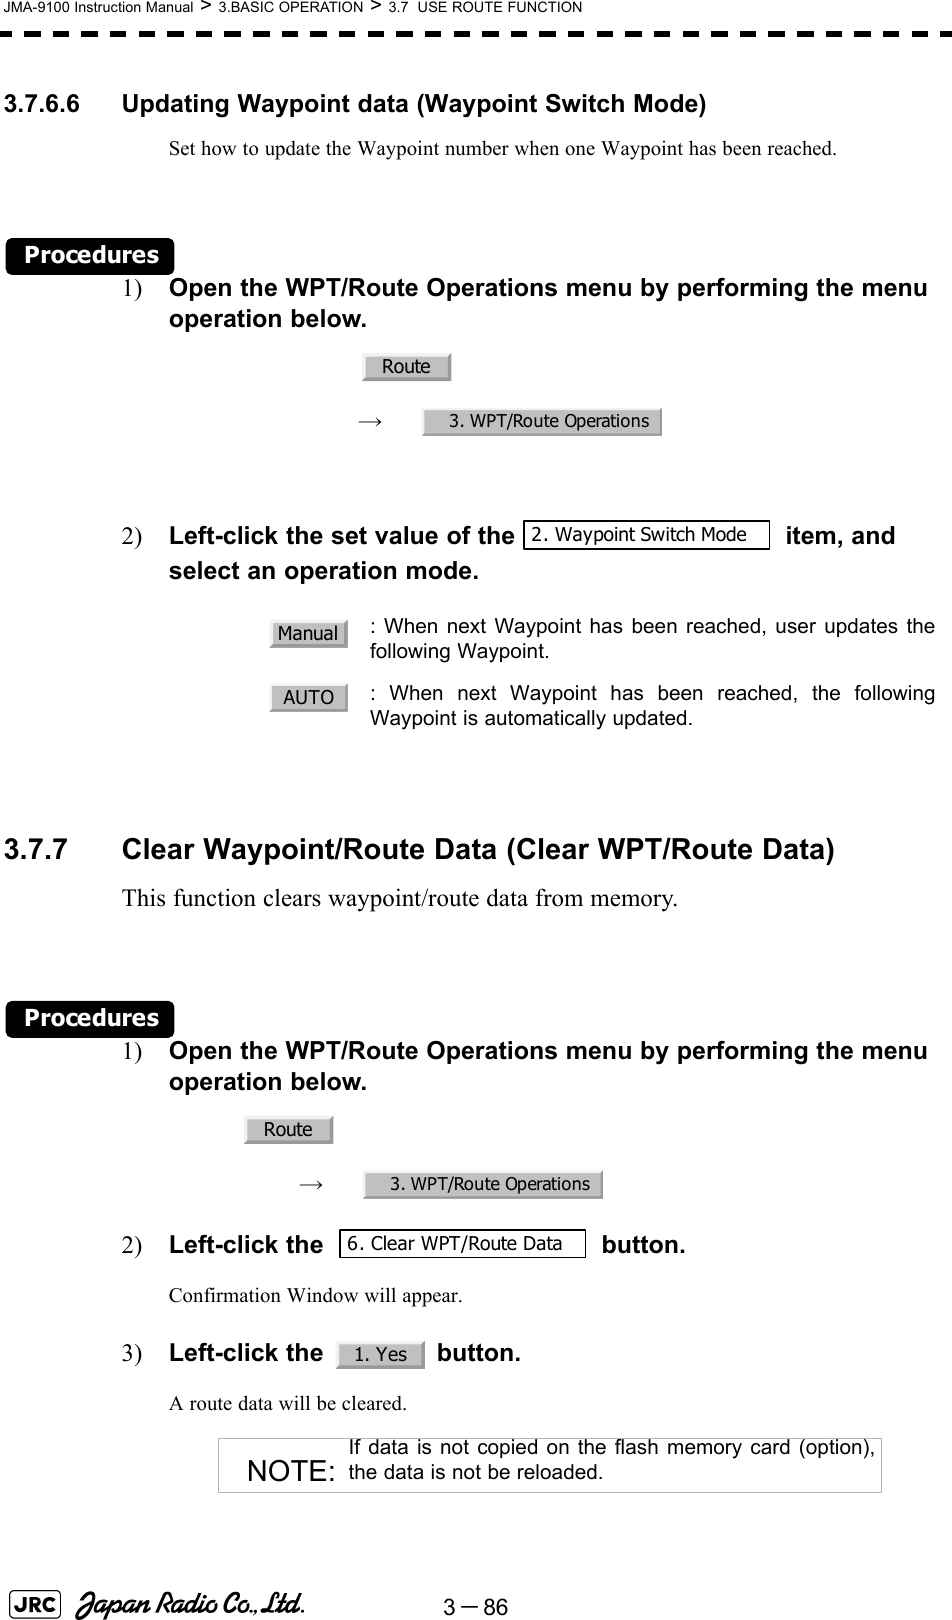 3－86JMA-9100 Instruction Manual &gt; 3.BASIC OPERATION &gt; 3.7  USE ROUTE FUNCTION3.7.6.6 Updating Waypoint data (Waypoint Switch Mode)Set how to update the Waypoint number when one Waypoint has been reached.Procedures1) Open the WPT/Route Operations menu by performing the menu operation below.　　 →　2) Left-click the set value of the  item, and select an operation mode.3.7.7 Clear Waypoint/Route Data (Clear WPT/Route Data)This function clears waypoint/route data from memory.Procedures1) Open the WPT/Route Operations menu by performing the menu operation below.→　2) Left-click the   button.Confirmation Window will appear.3) Left-click the   button.A route data will be cleared. : When next Waypoint has been reached, user updates thefollowing Waypoint.  : When next Waypoint has been reached, the followingWaypoint is automatically updated.NOTE:If data is not copied on the flash memory card (option),the data is not be reloaded.Route3. WPT/Route Operations2. Waypoint Switch ModeManualAUTORoute3. WPT/Route Operations6. Clear WPT/Route Data1. Yes